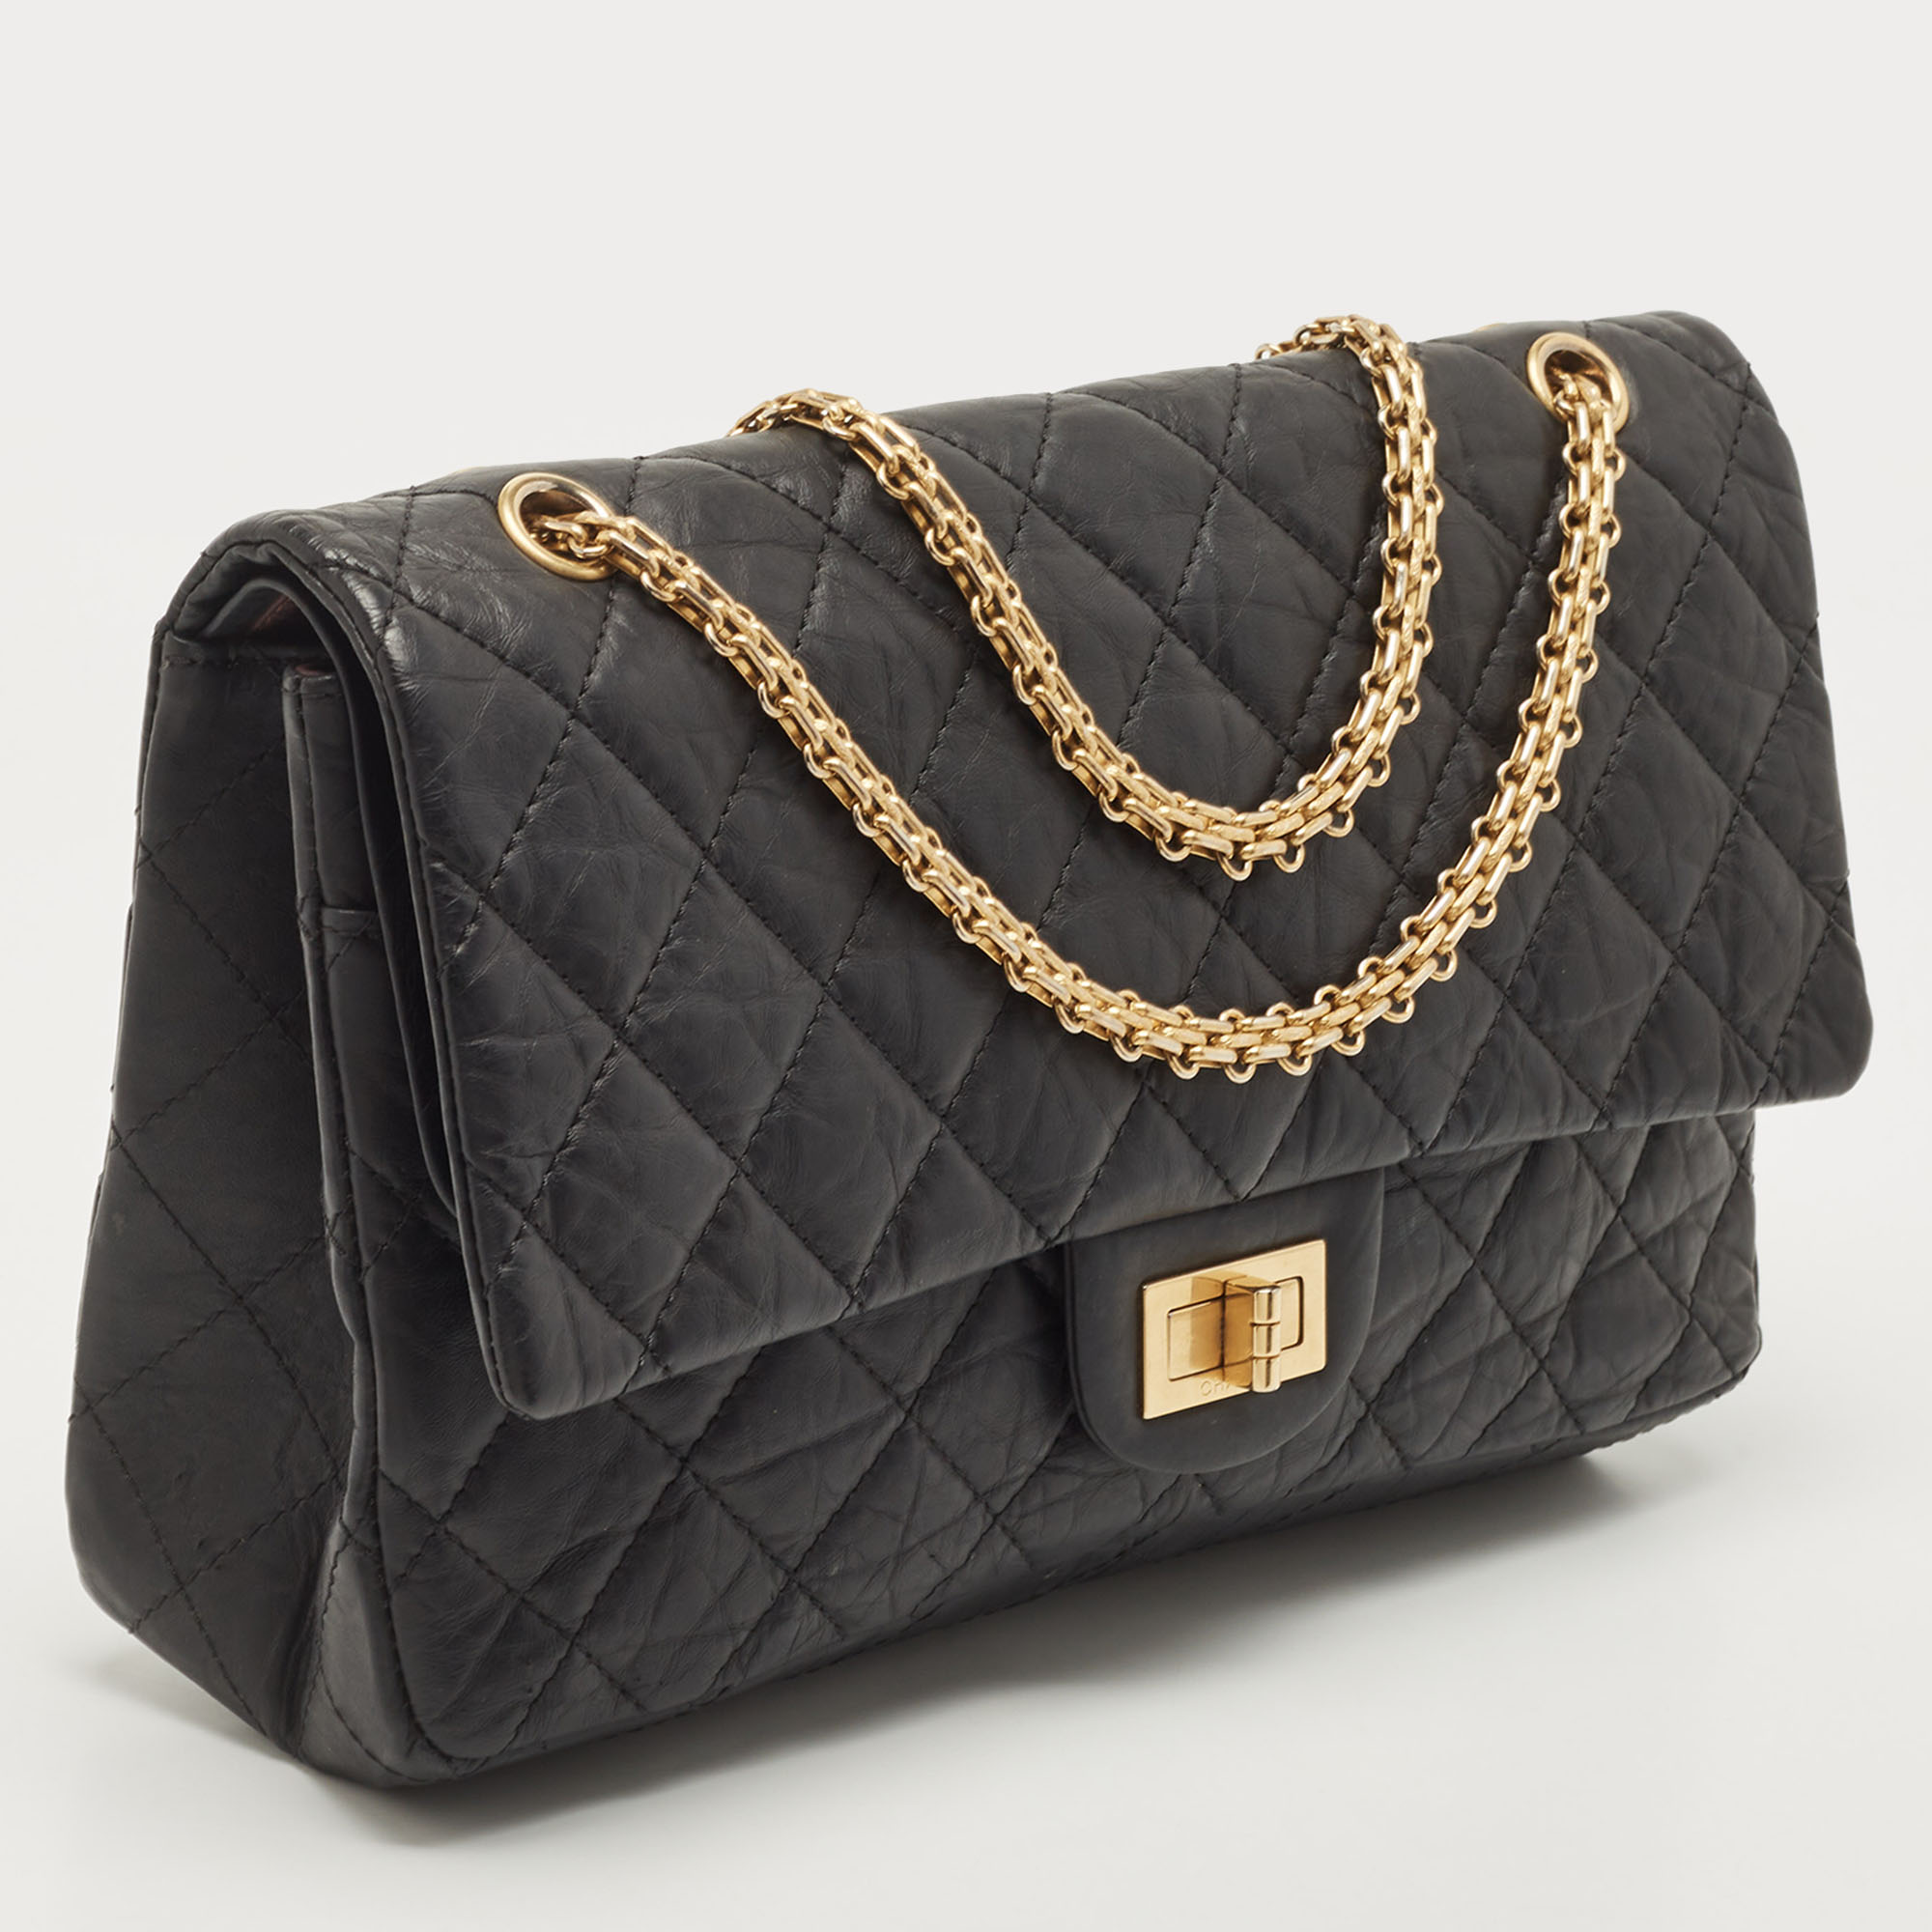 Chanel Black Quilted Aged Leather 227 Reissue 2.55 Flap Bag